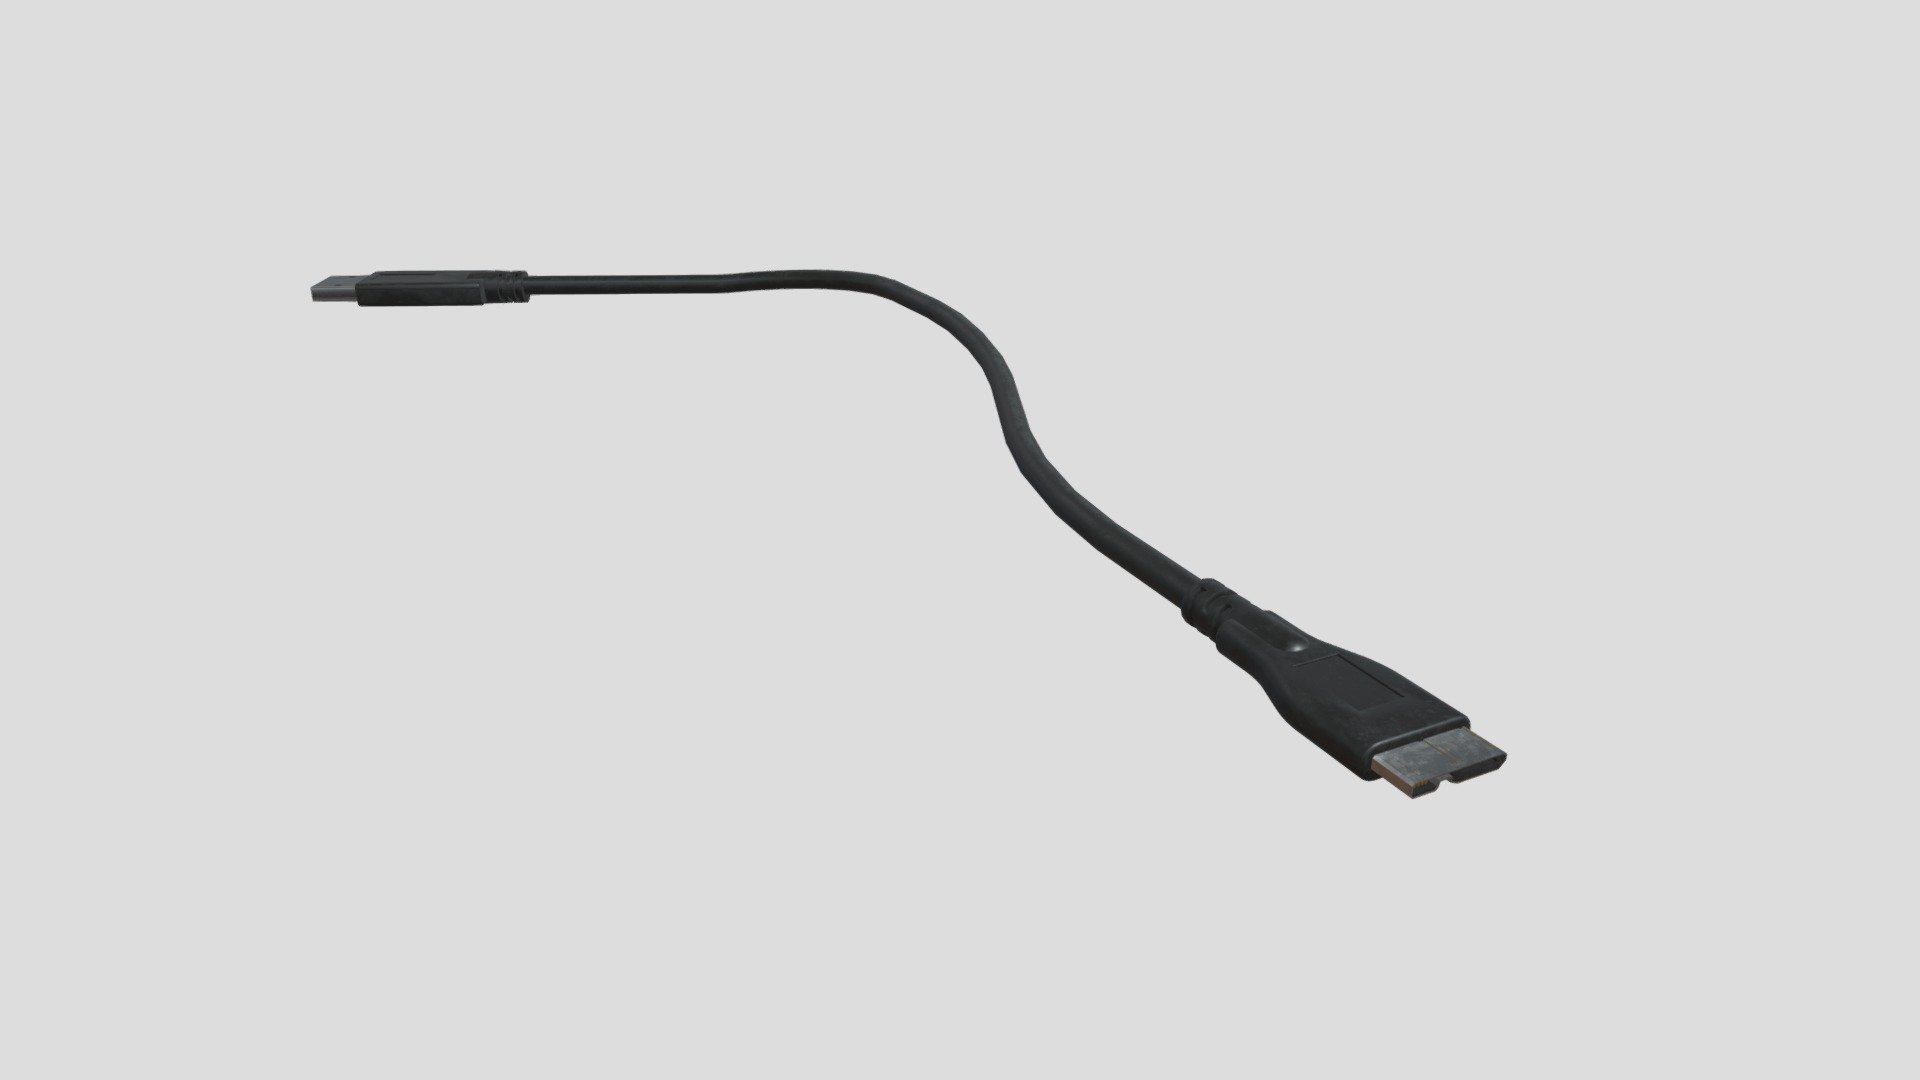 USB to Micro B Cable